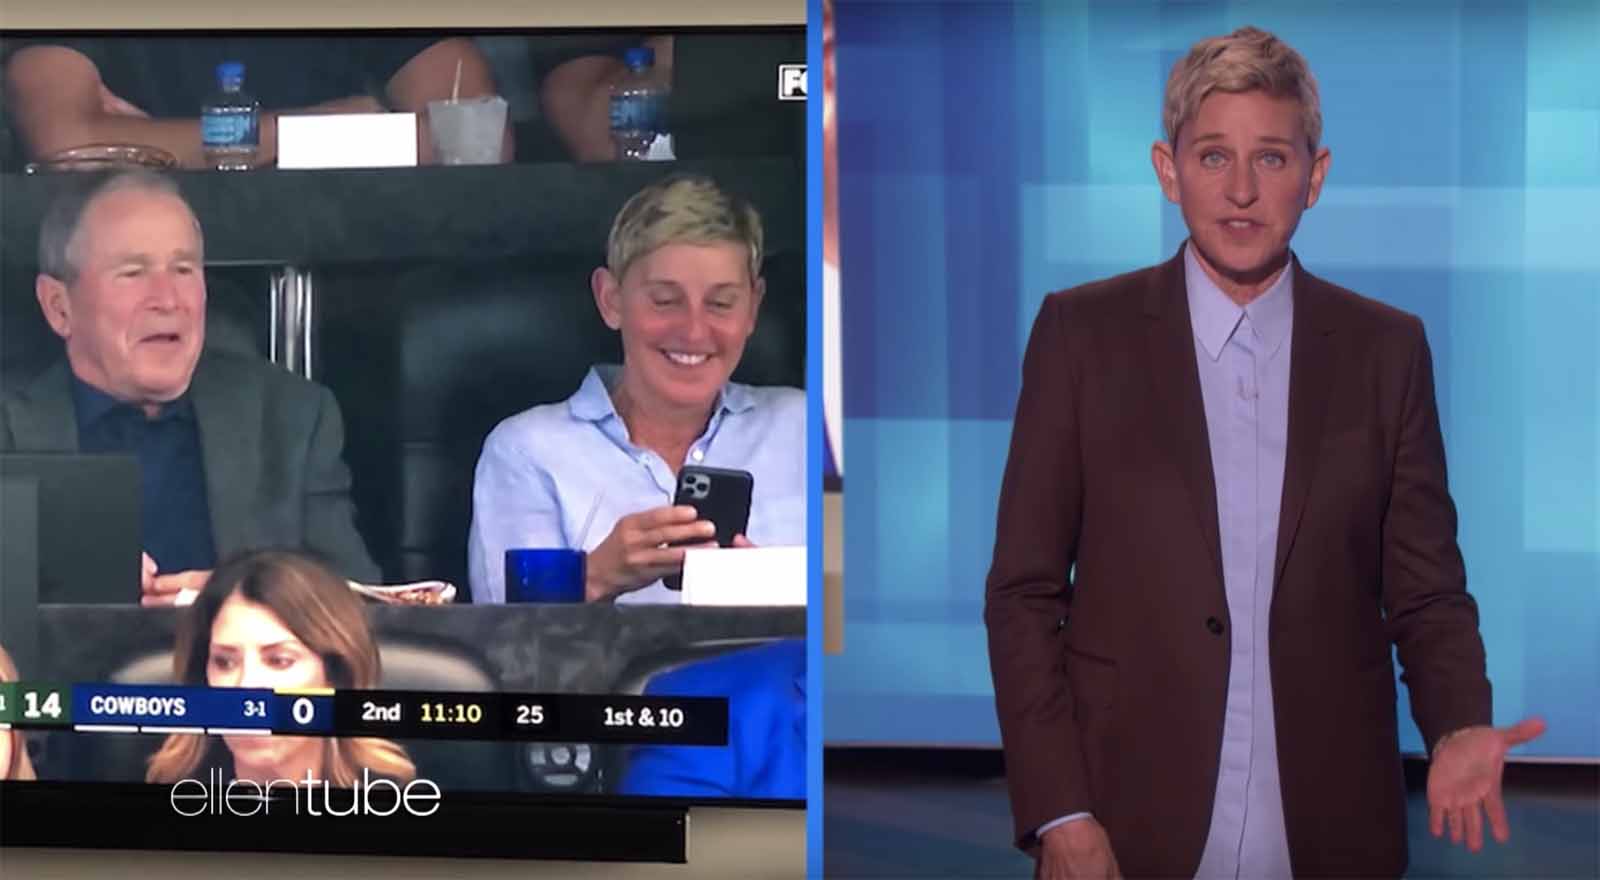 Sure, 2020 has not been a good year for Ellen DeGeneres. But considering people have been saying she's mean for years, it's what she deserves. 